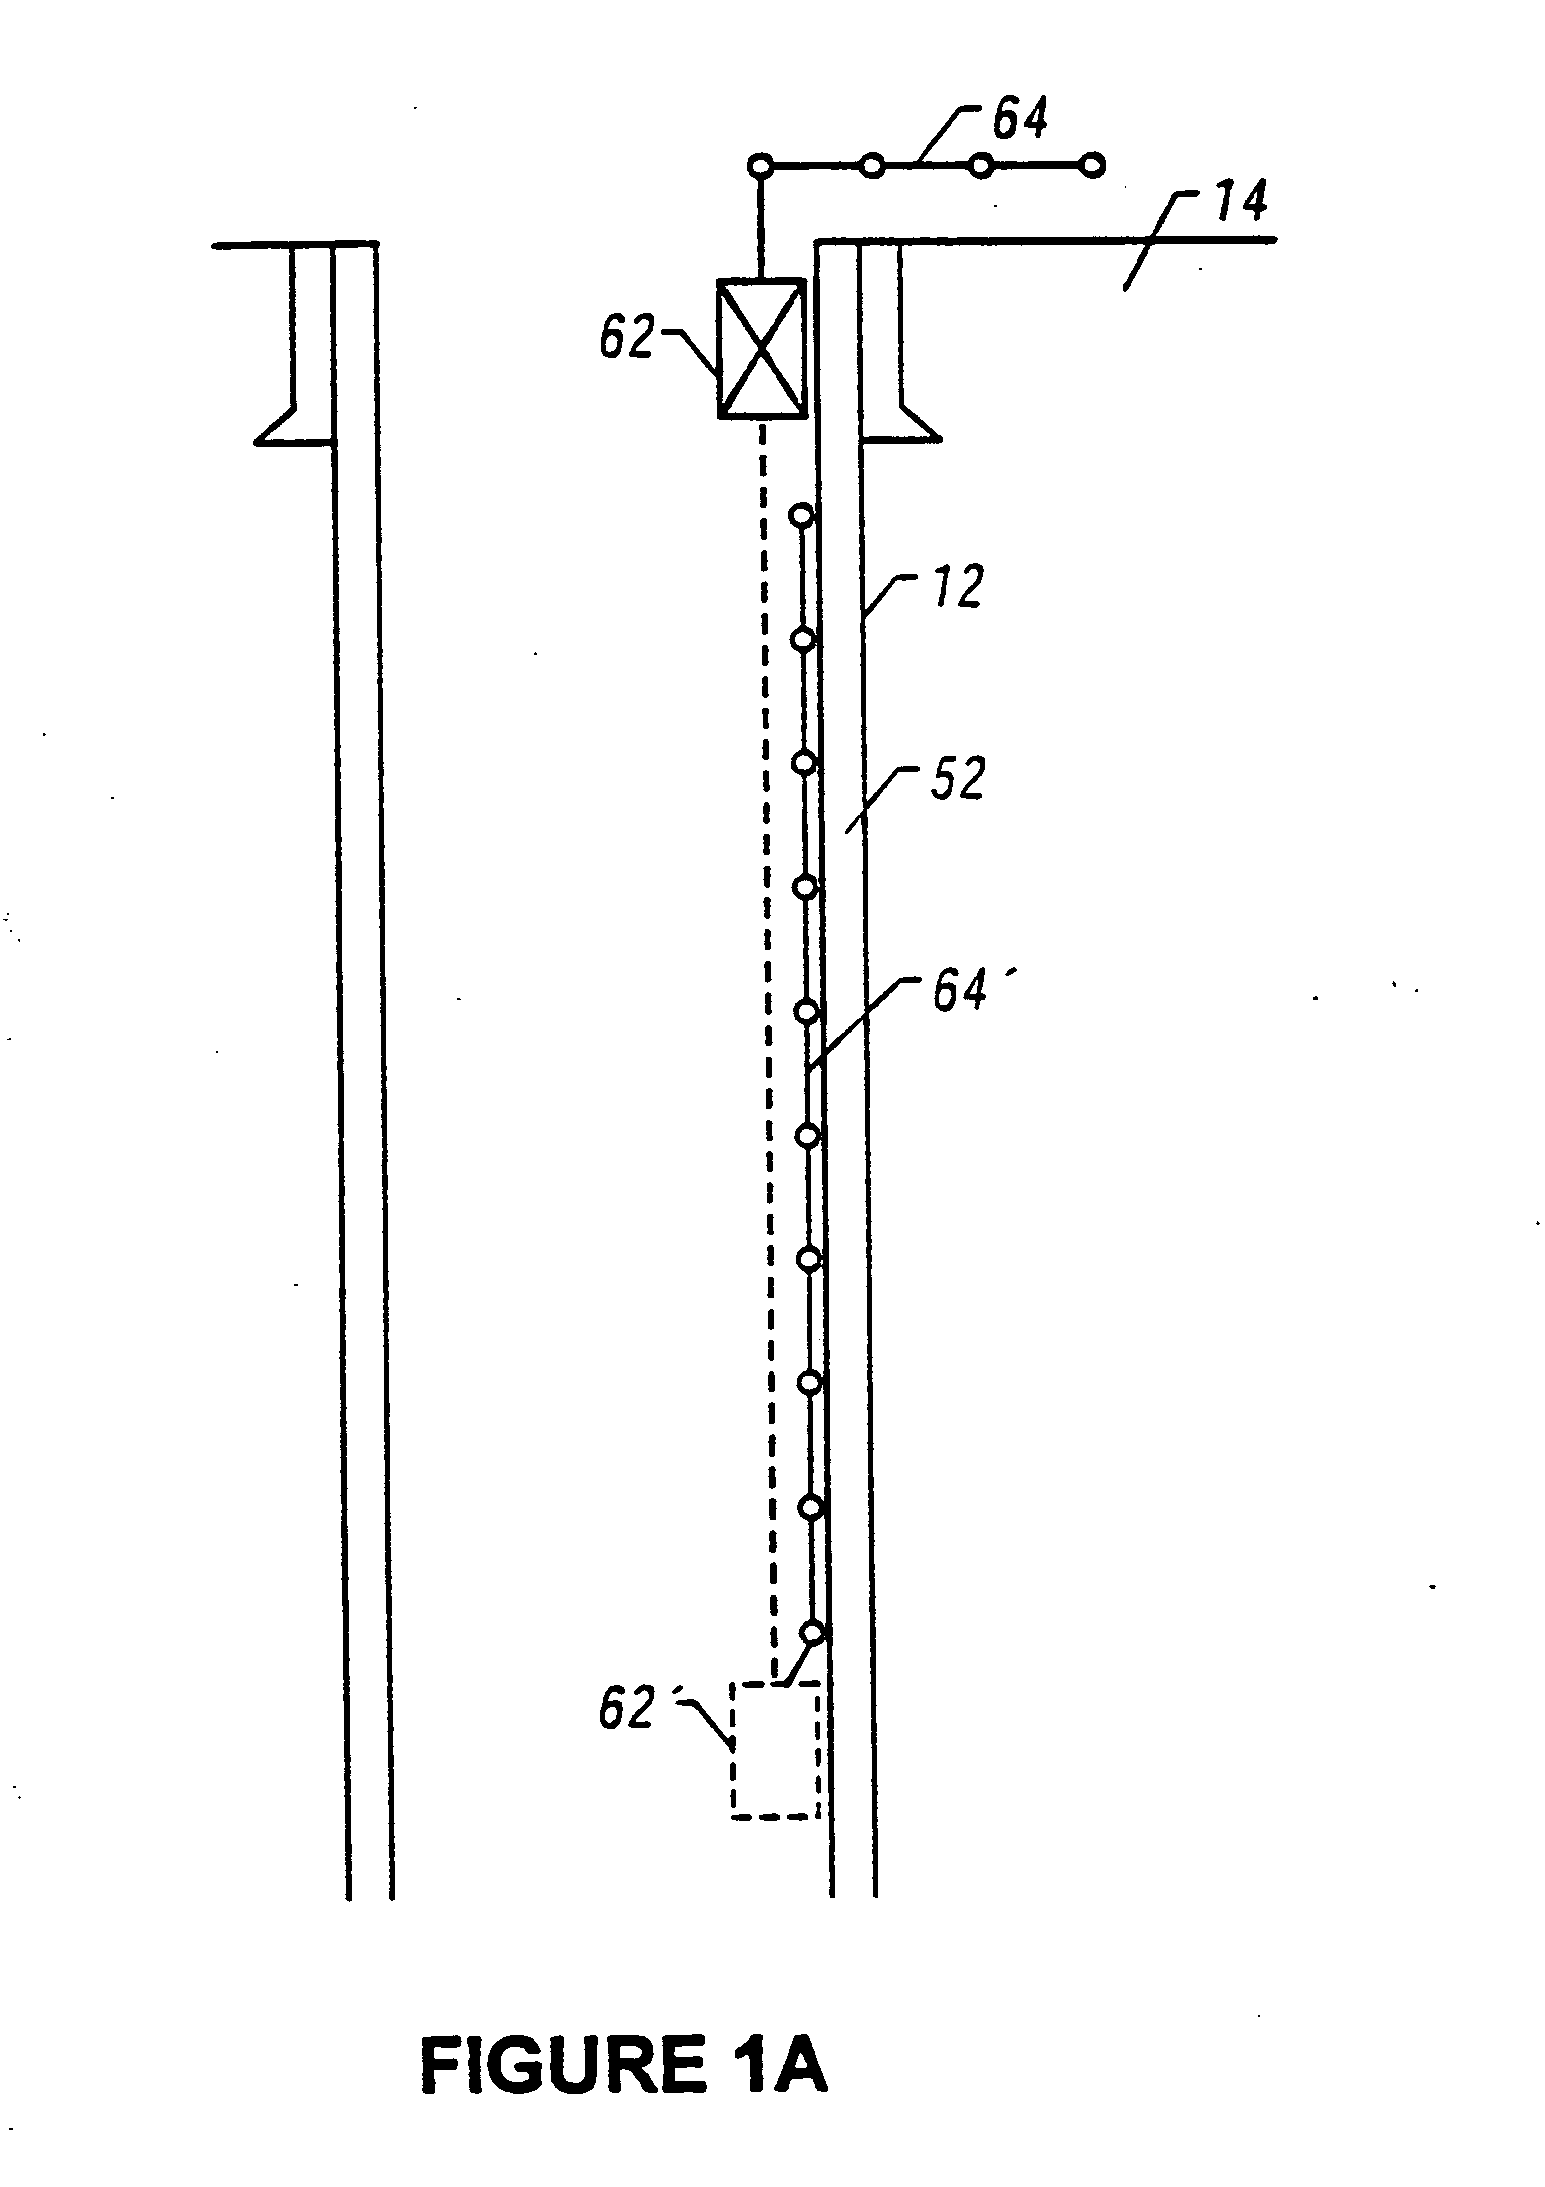 Providing a light cell in a wellbore